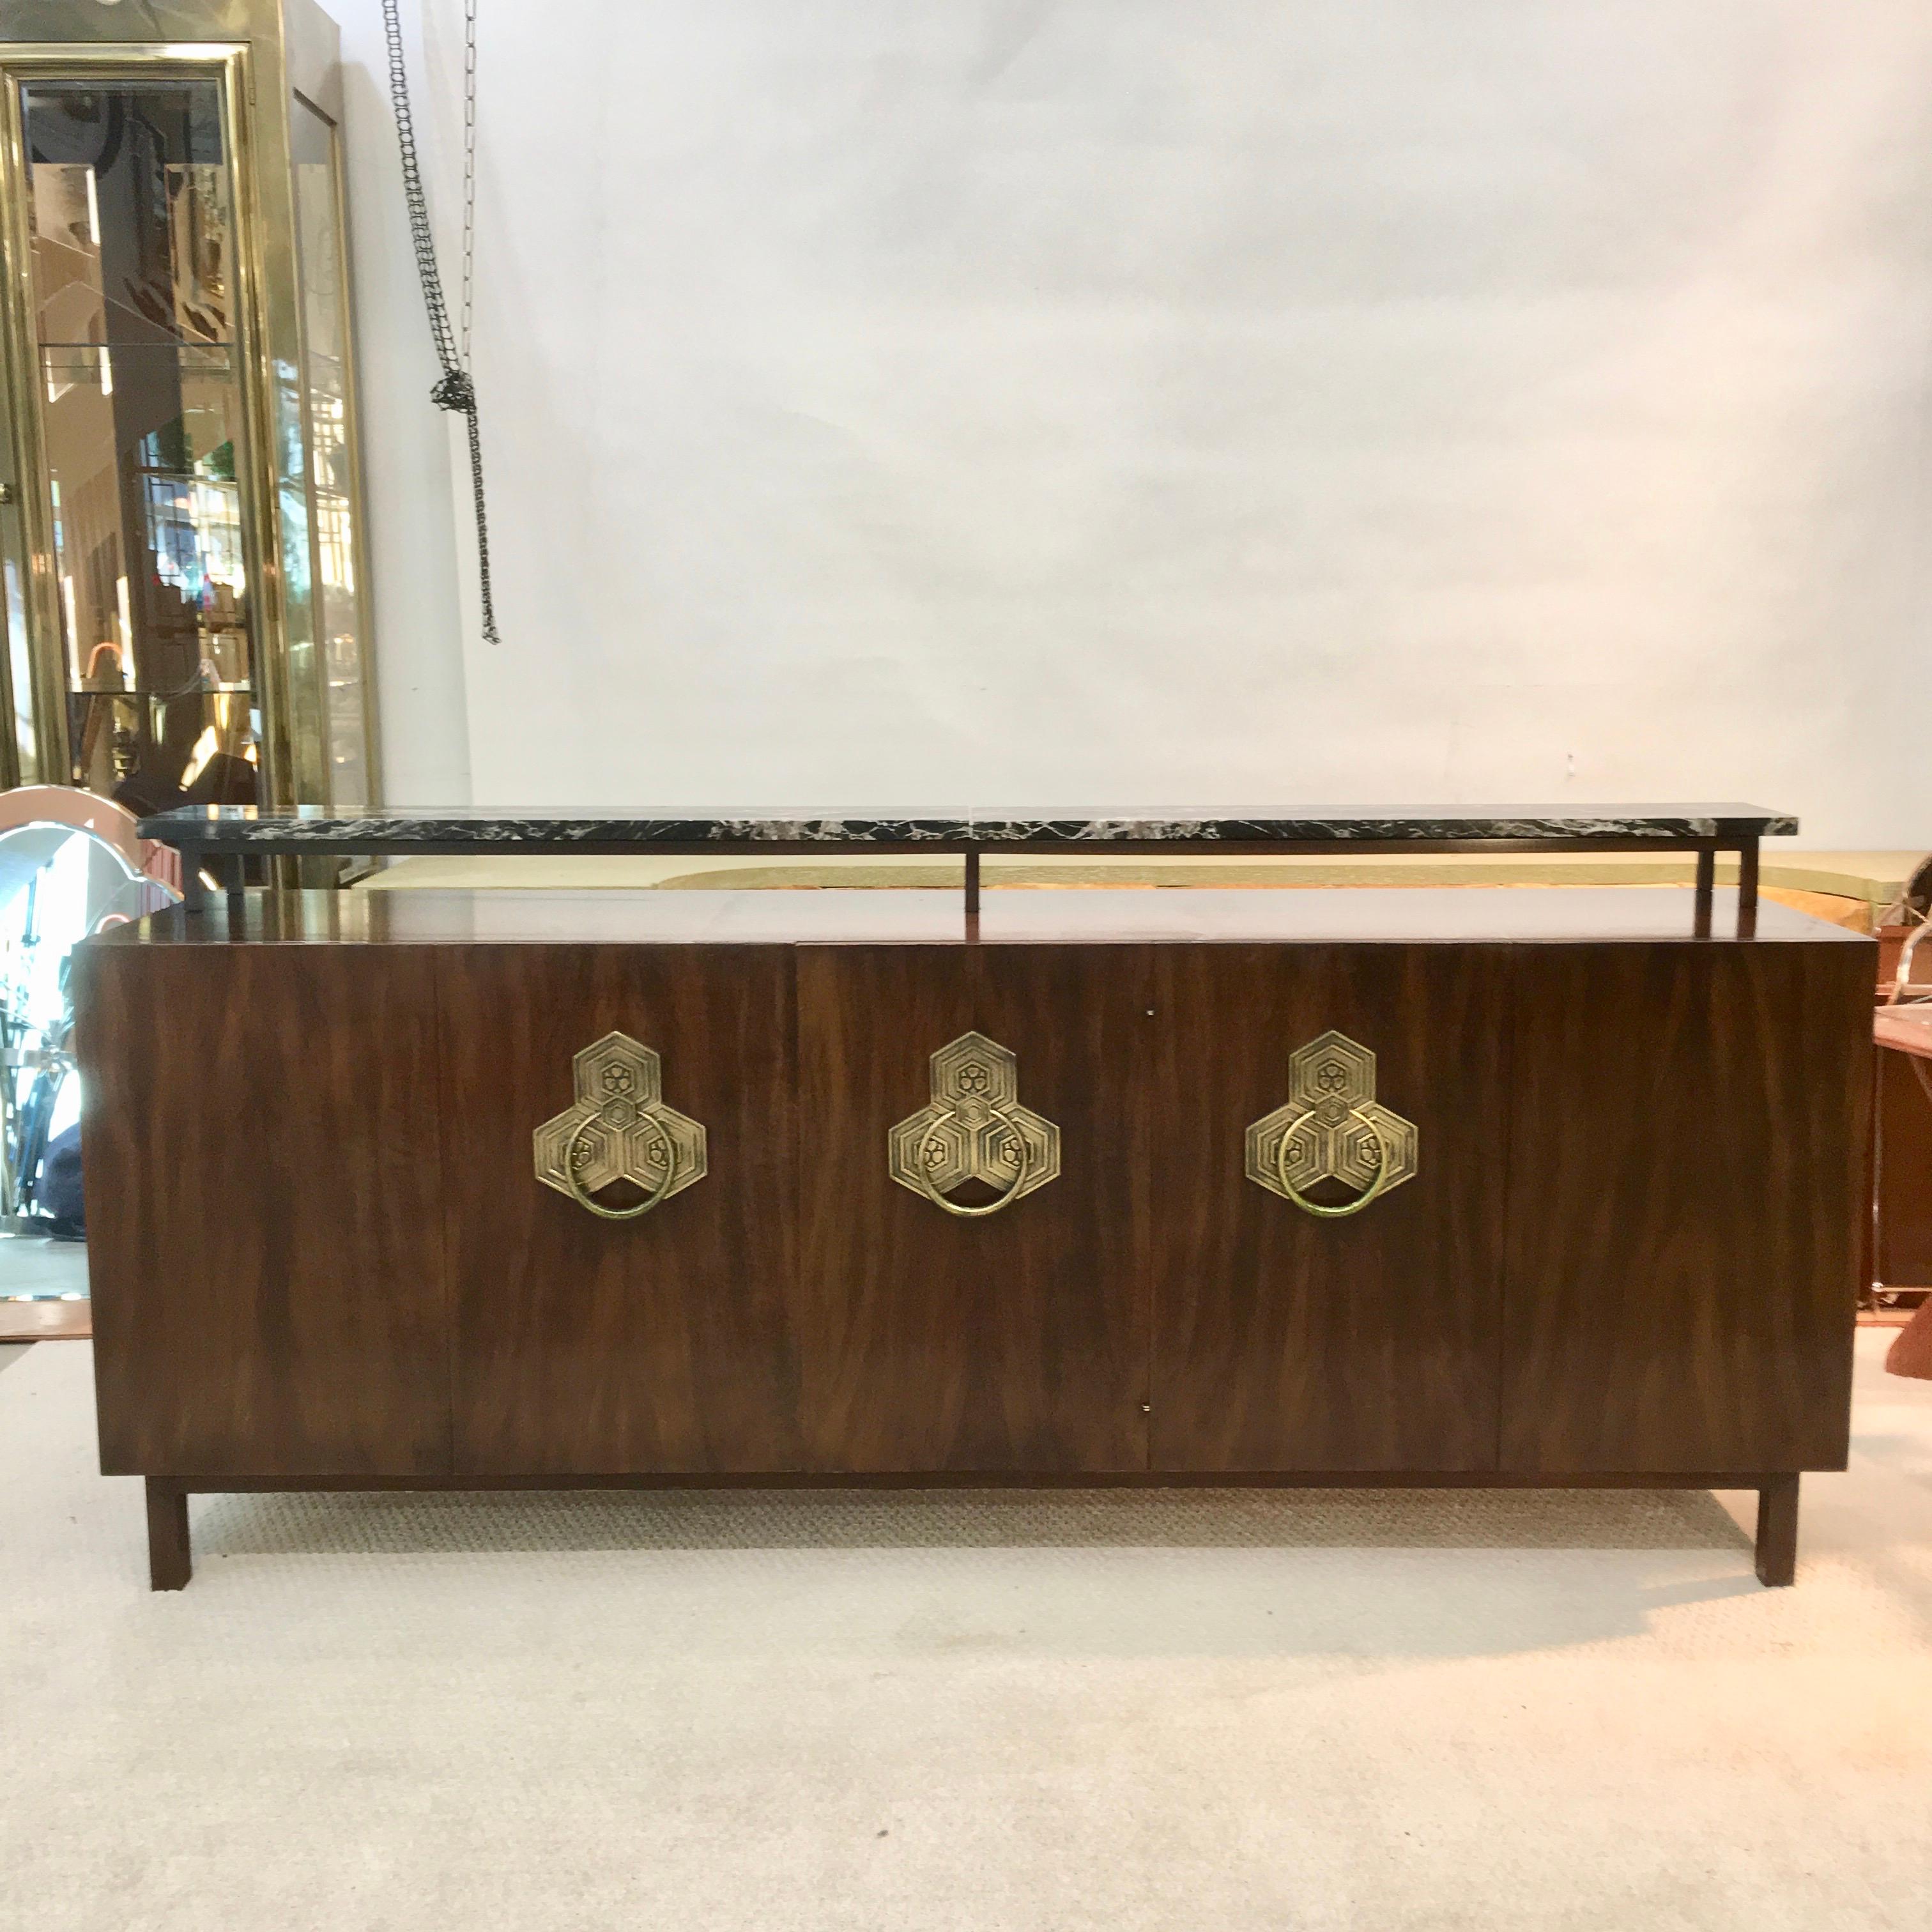 Designed by Bert England as part of the Orientation collection in 1965, this credenza was made for John Widdicomb, one of the finest furniture makers of the day. The impressive sideboard is in Persian walnut with a removable Nero Marquina marble